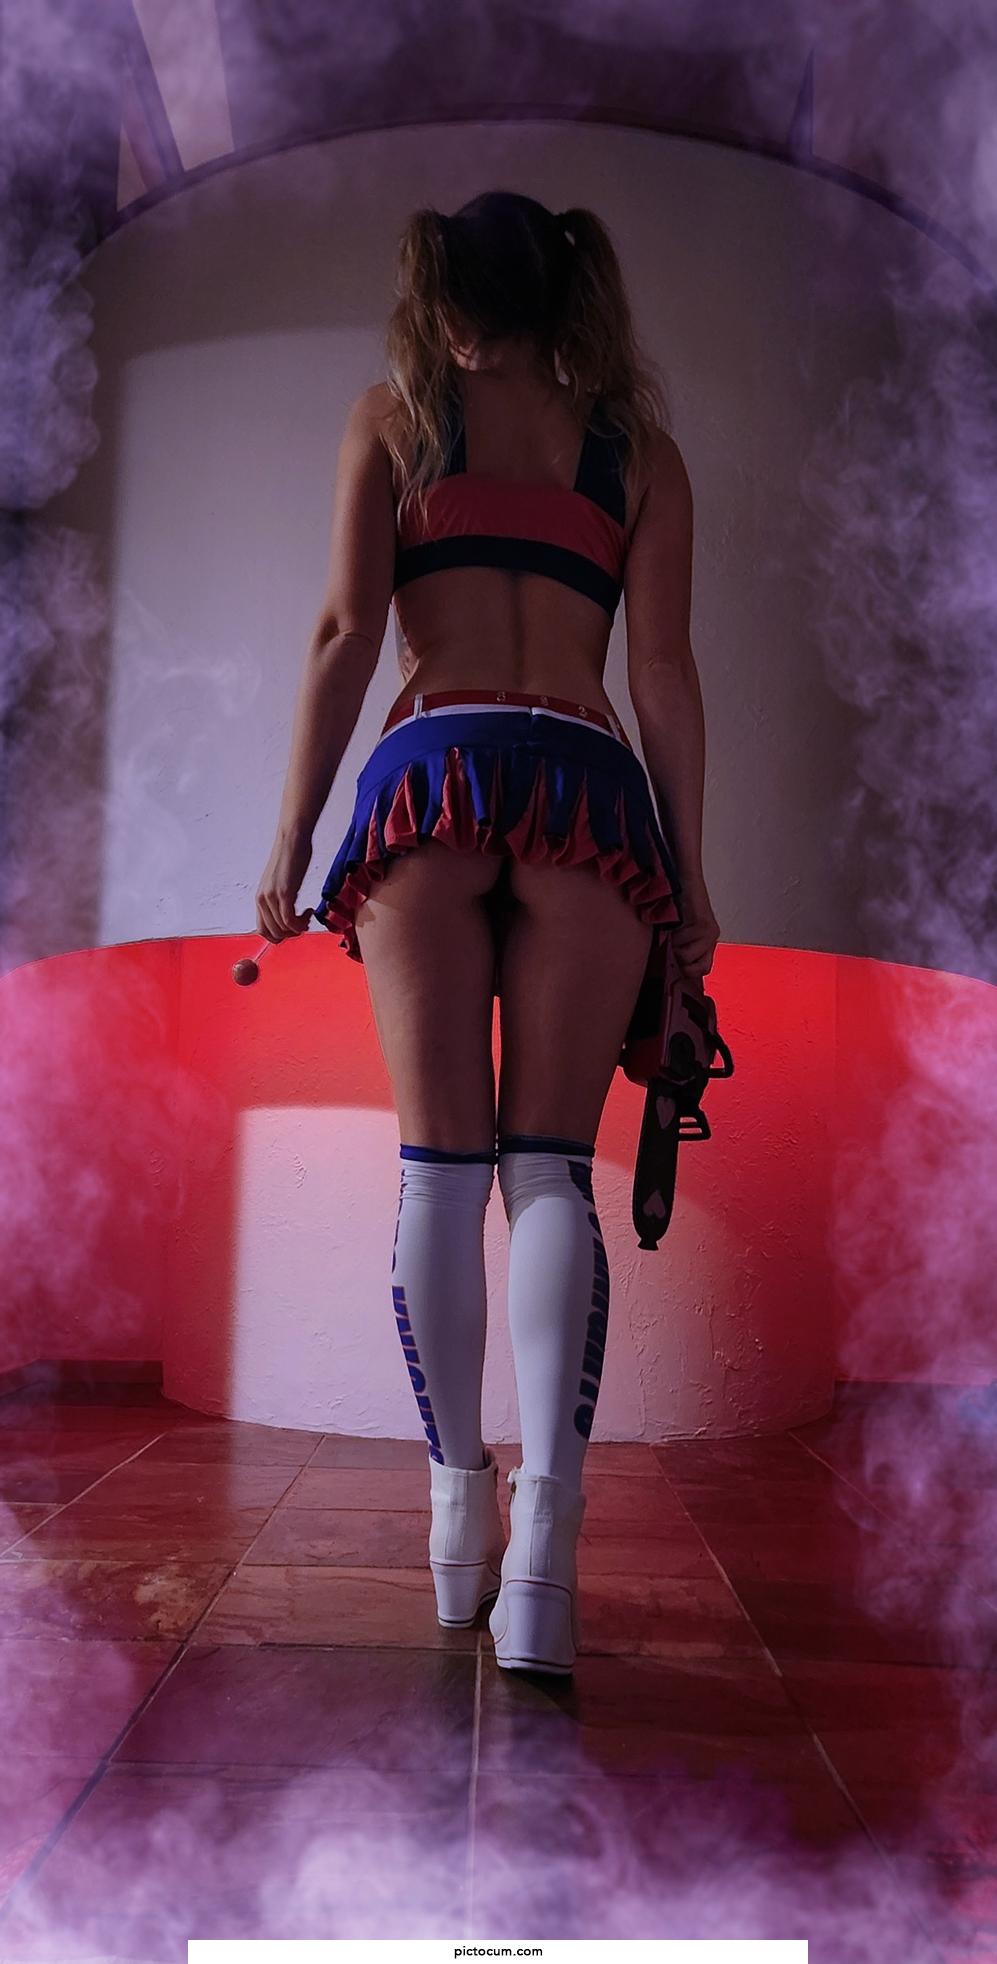 Excited for the Lollipop Chainsaw remake!